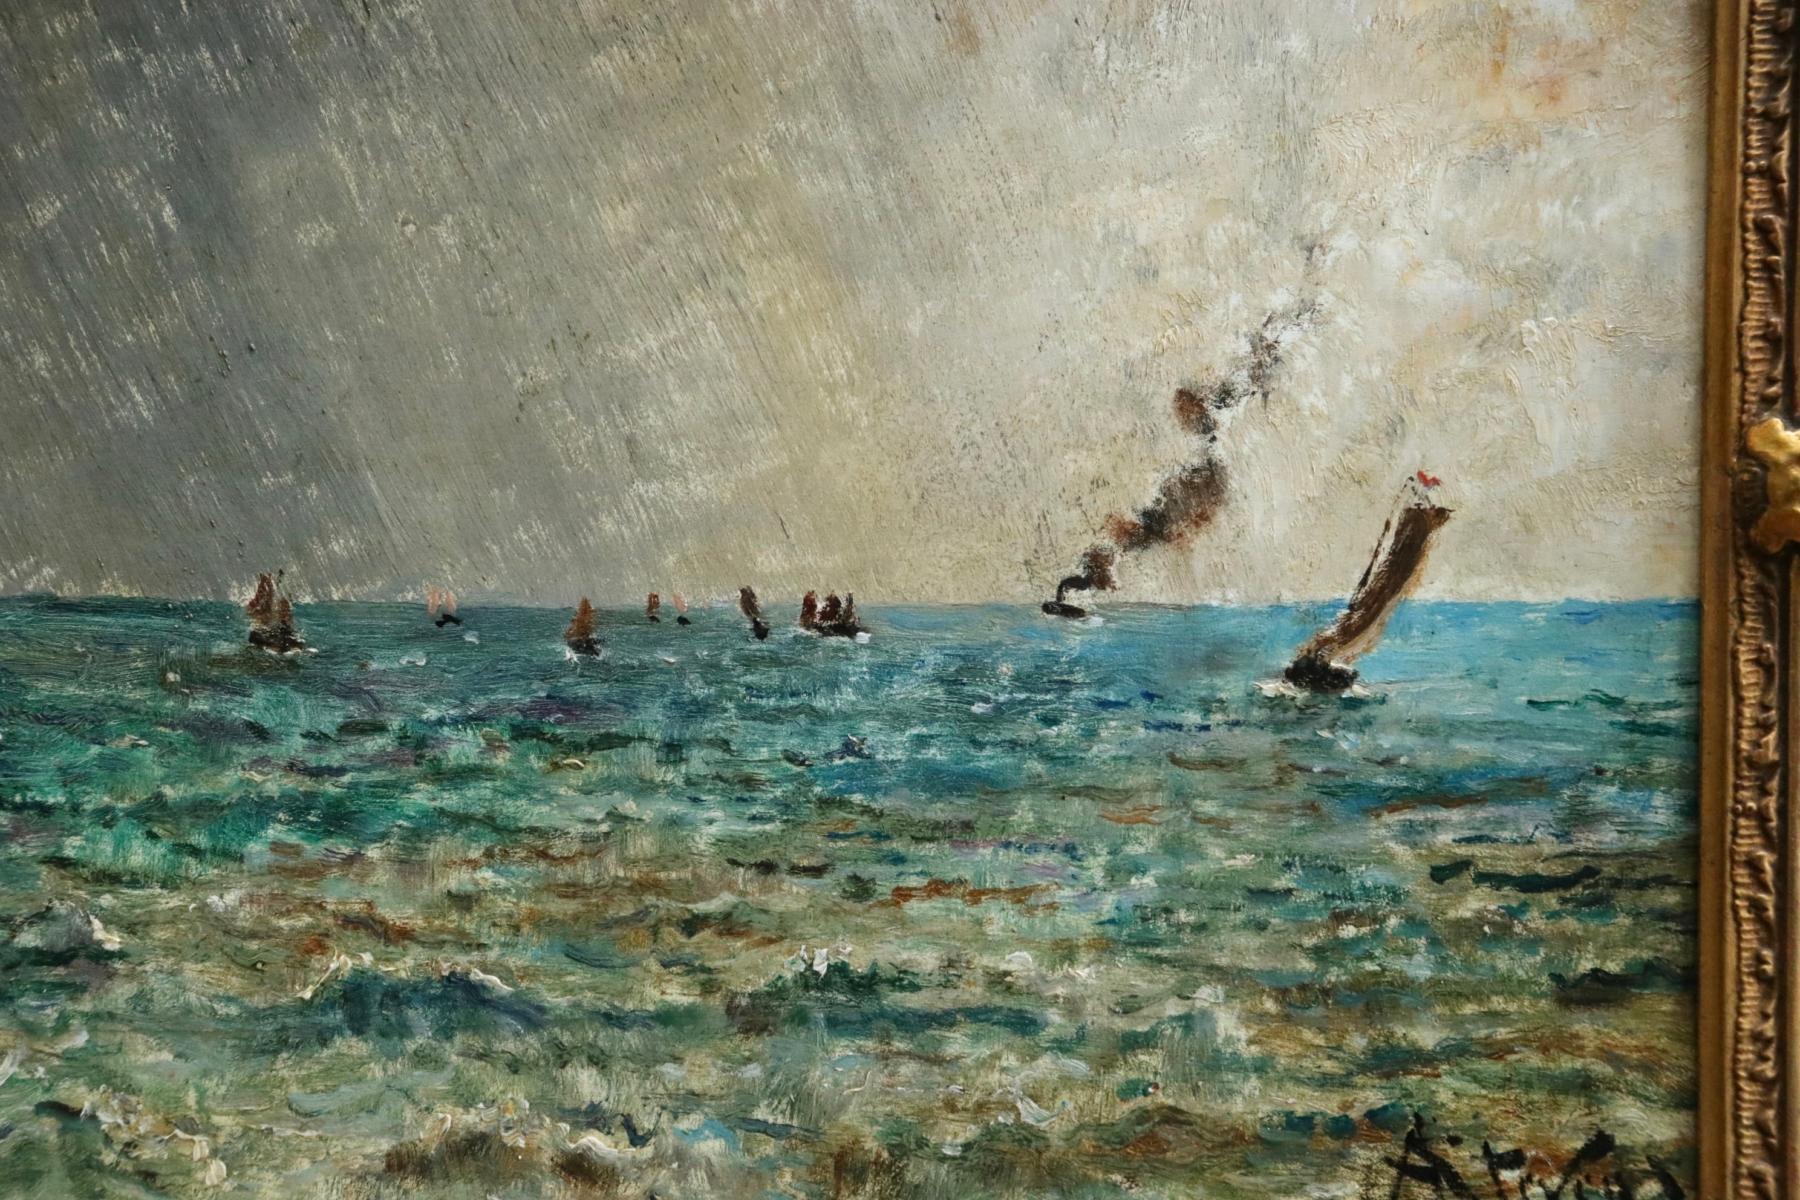 Steamers off the Coast - 19th Century Oil, Boats in Seascape by Alfred Stevens - Impressionist Painting by Alfred Émile Léopold Stevens